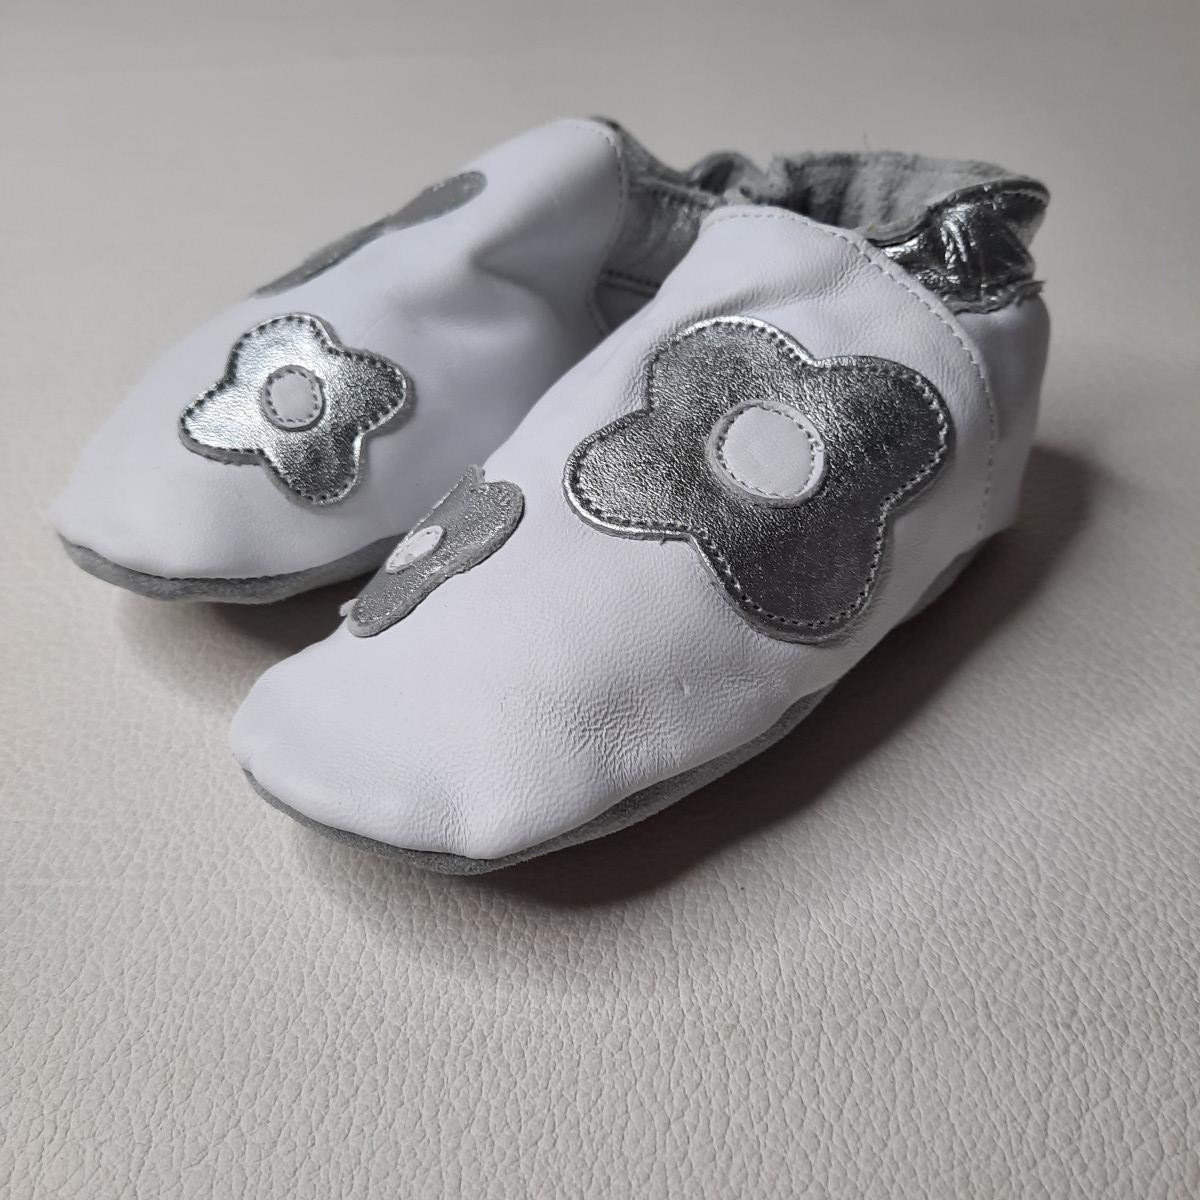 Chaussons en cuir - Flower white/silver - Taille L - photo 6